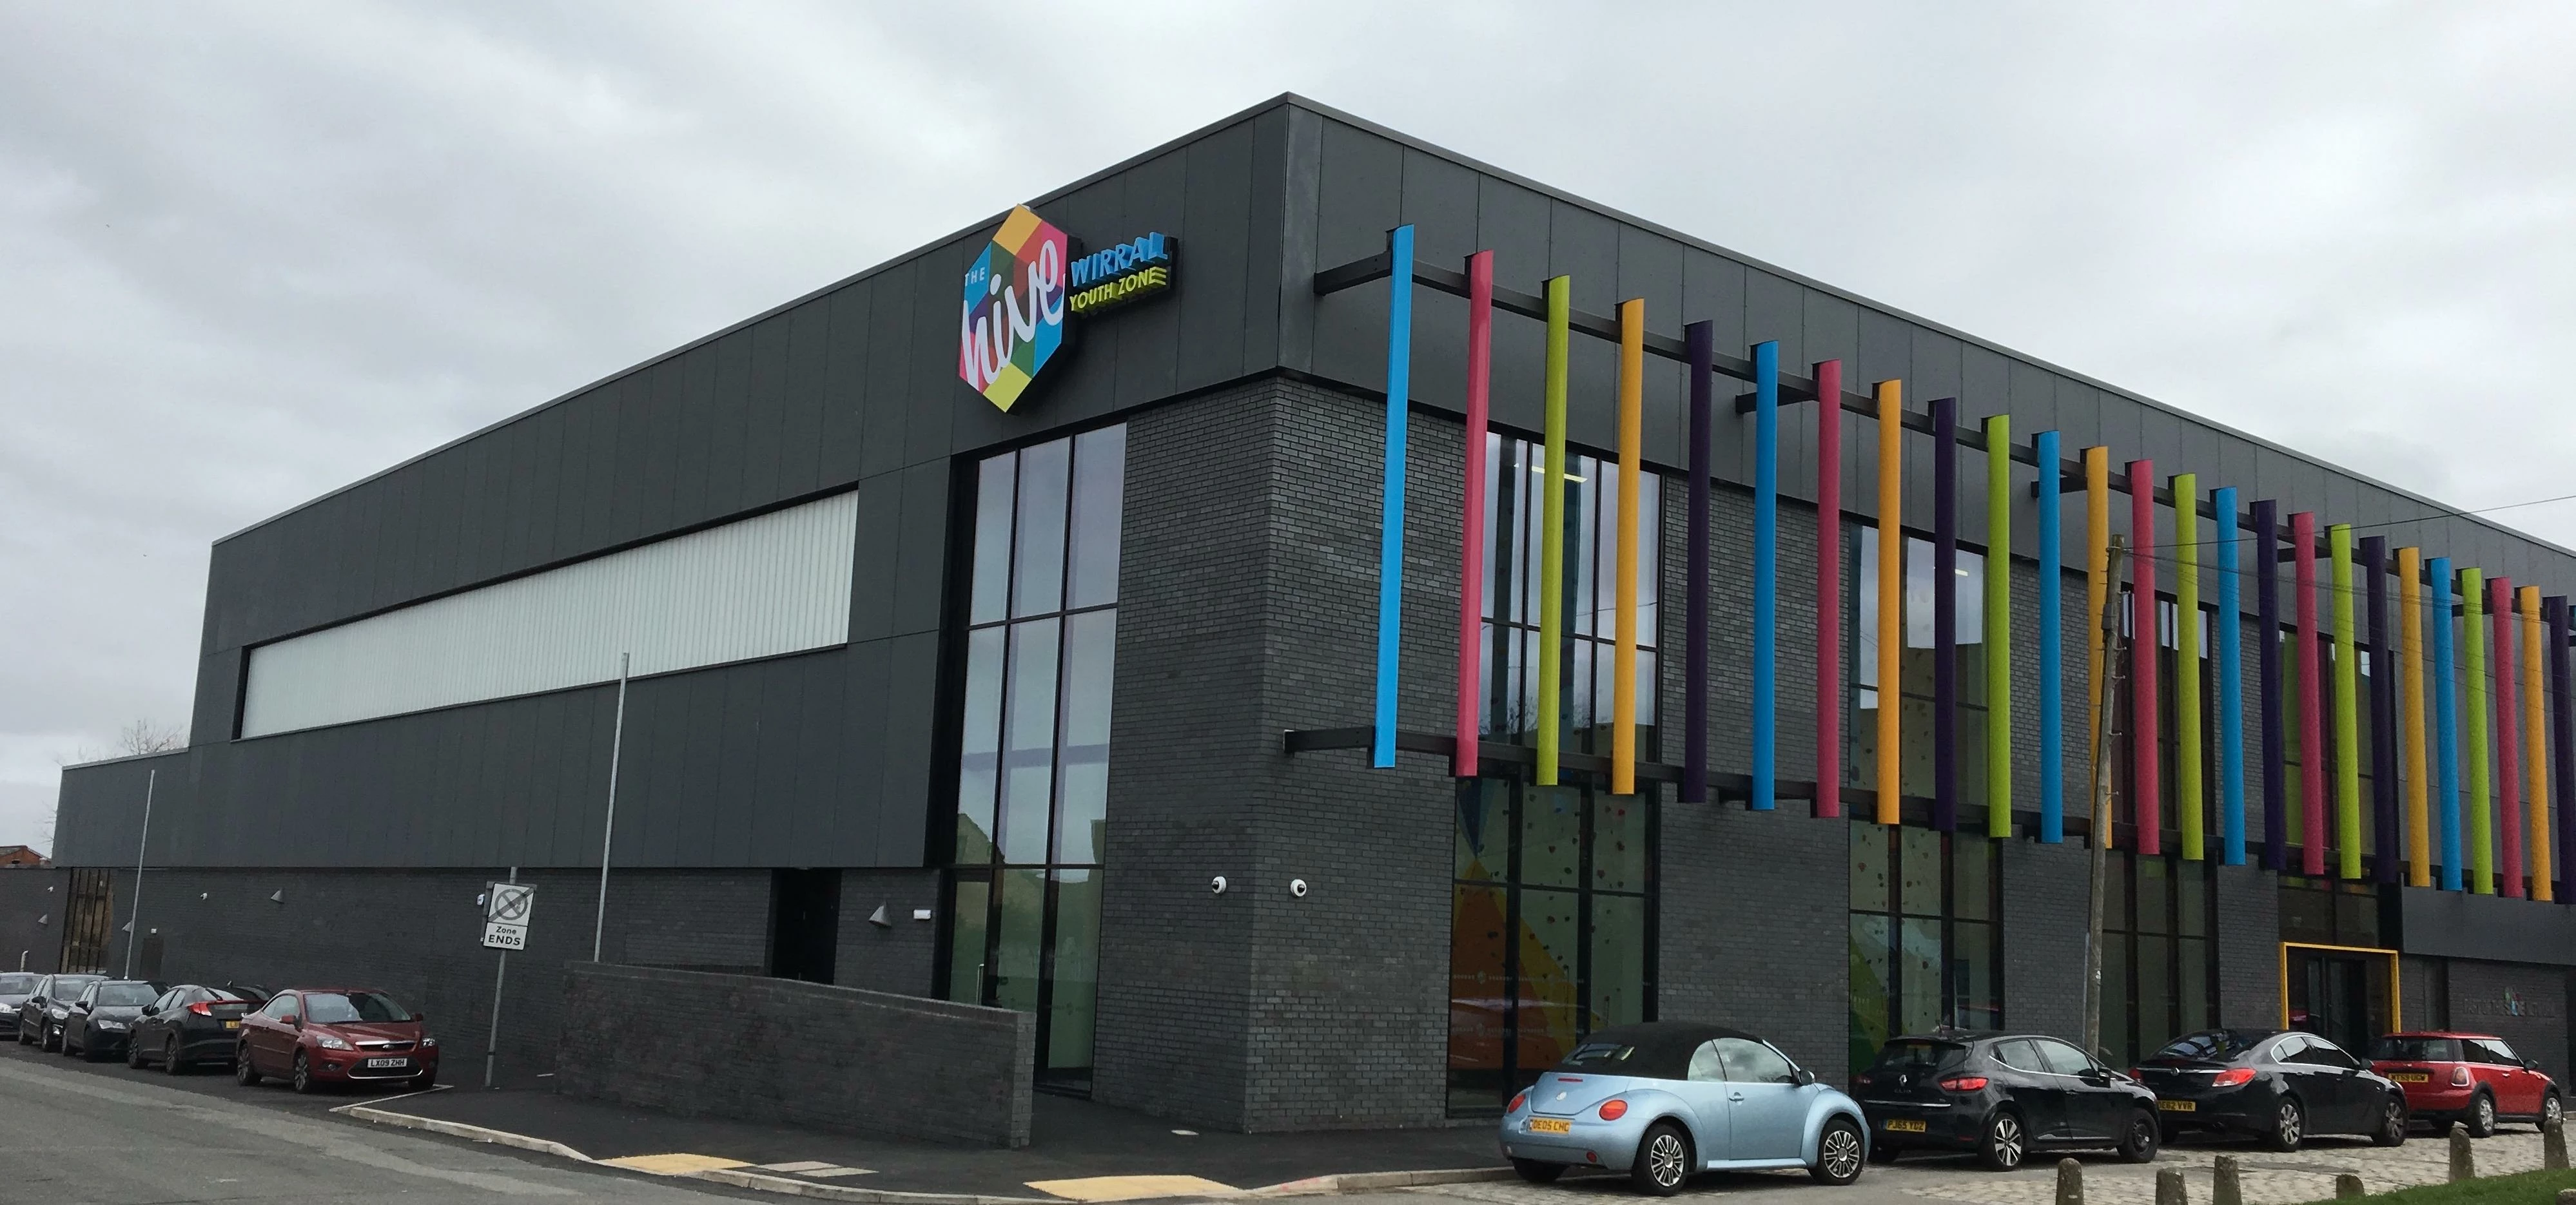 The HIVE youth zone in Birkenhead, Wirral